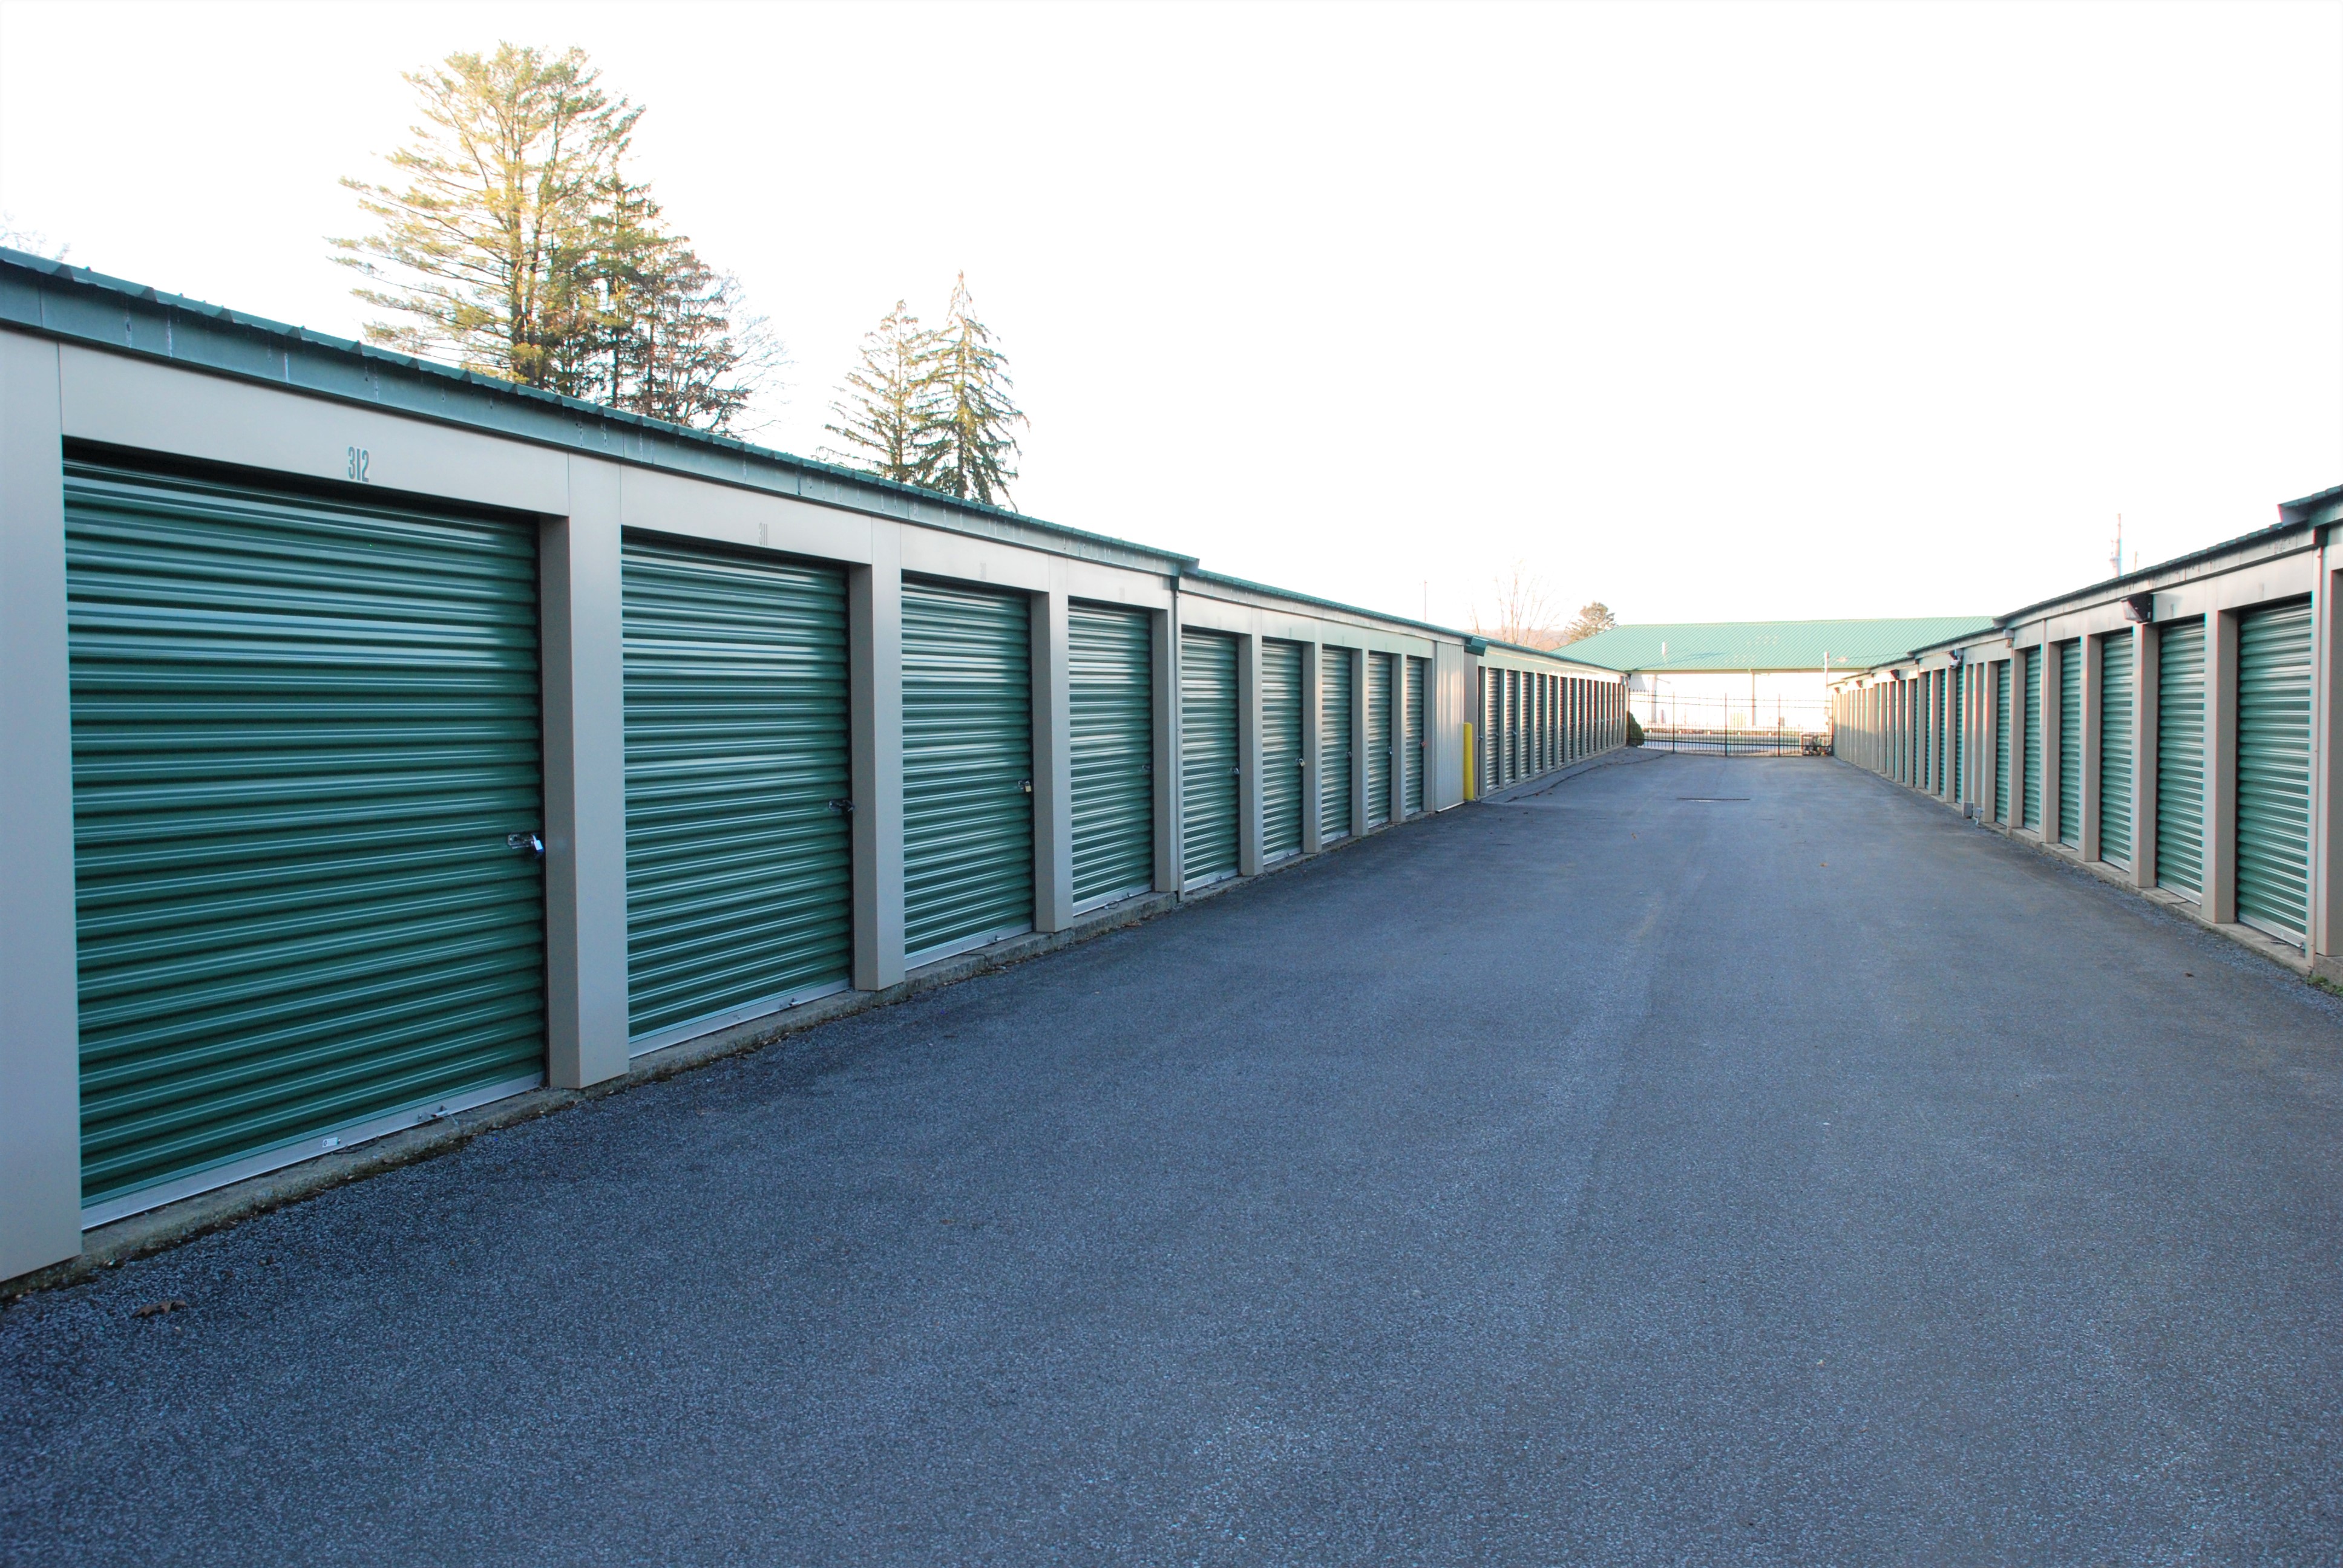 All of our outdoor units are drive up access, making it easy to get into your unit.